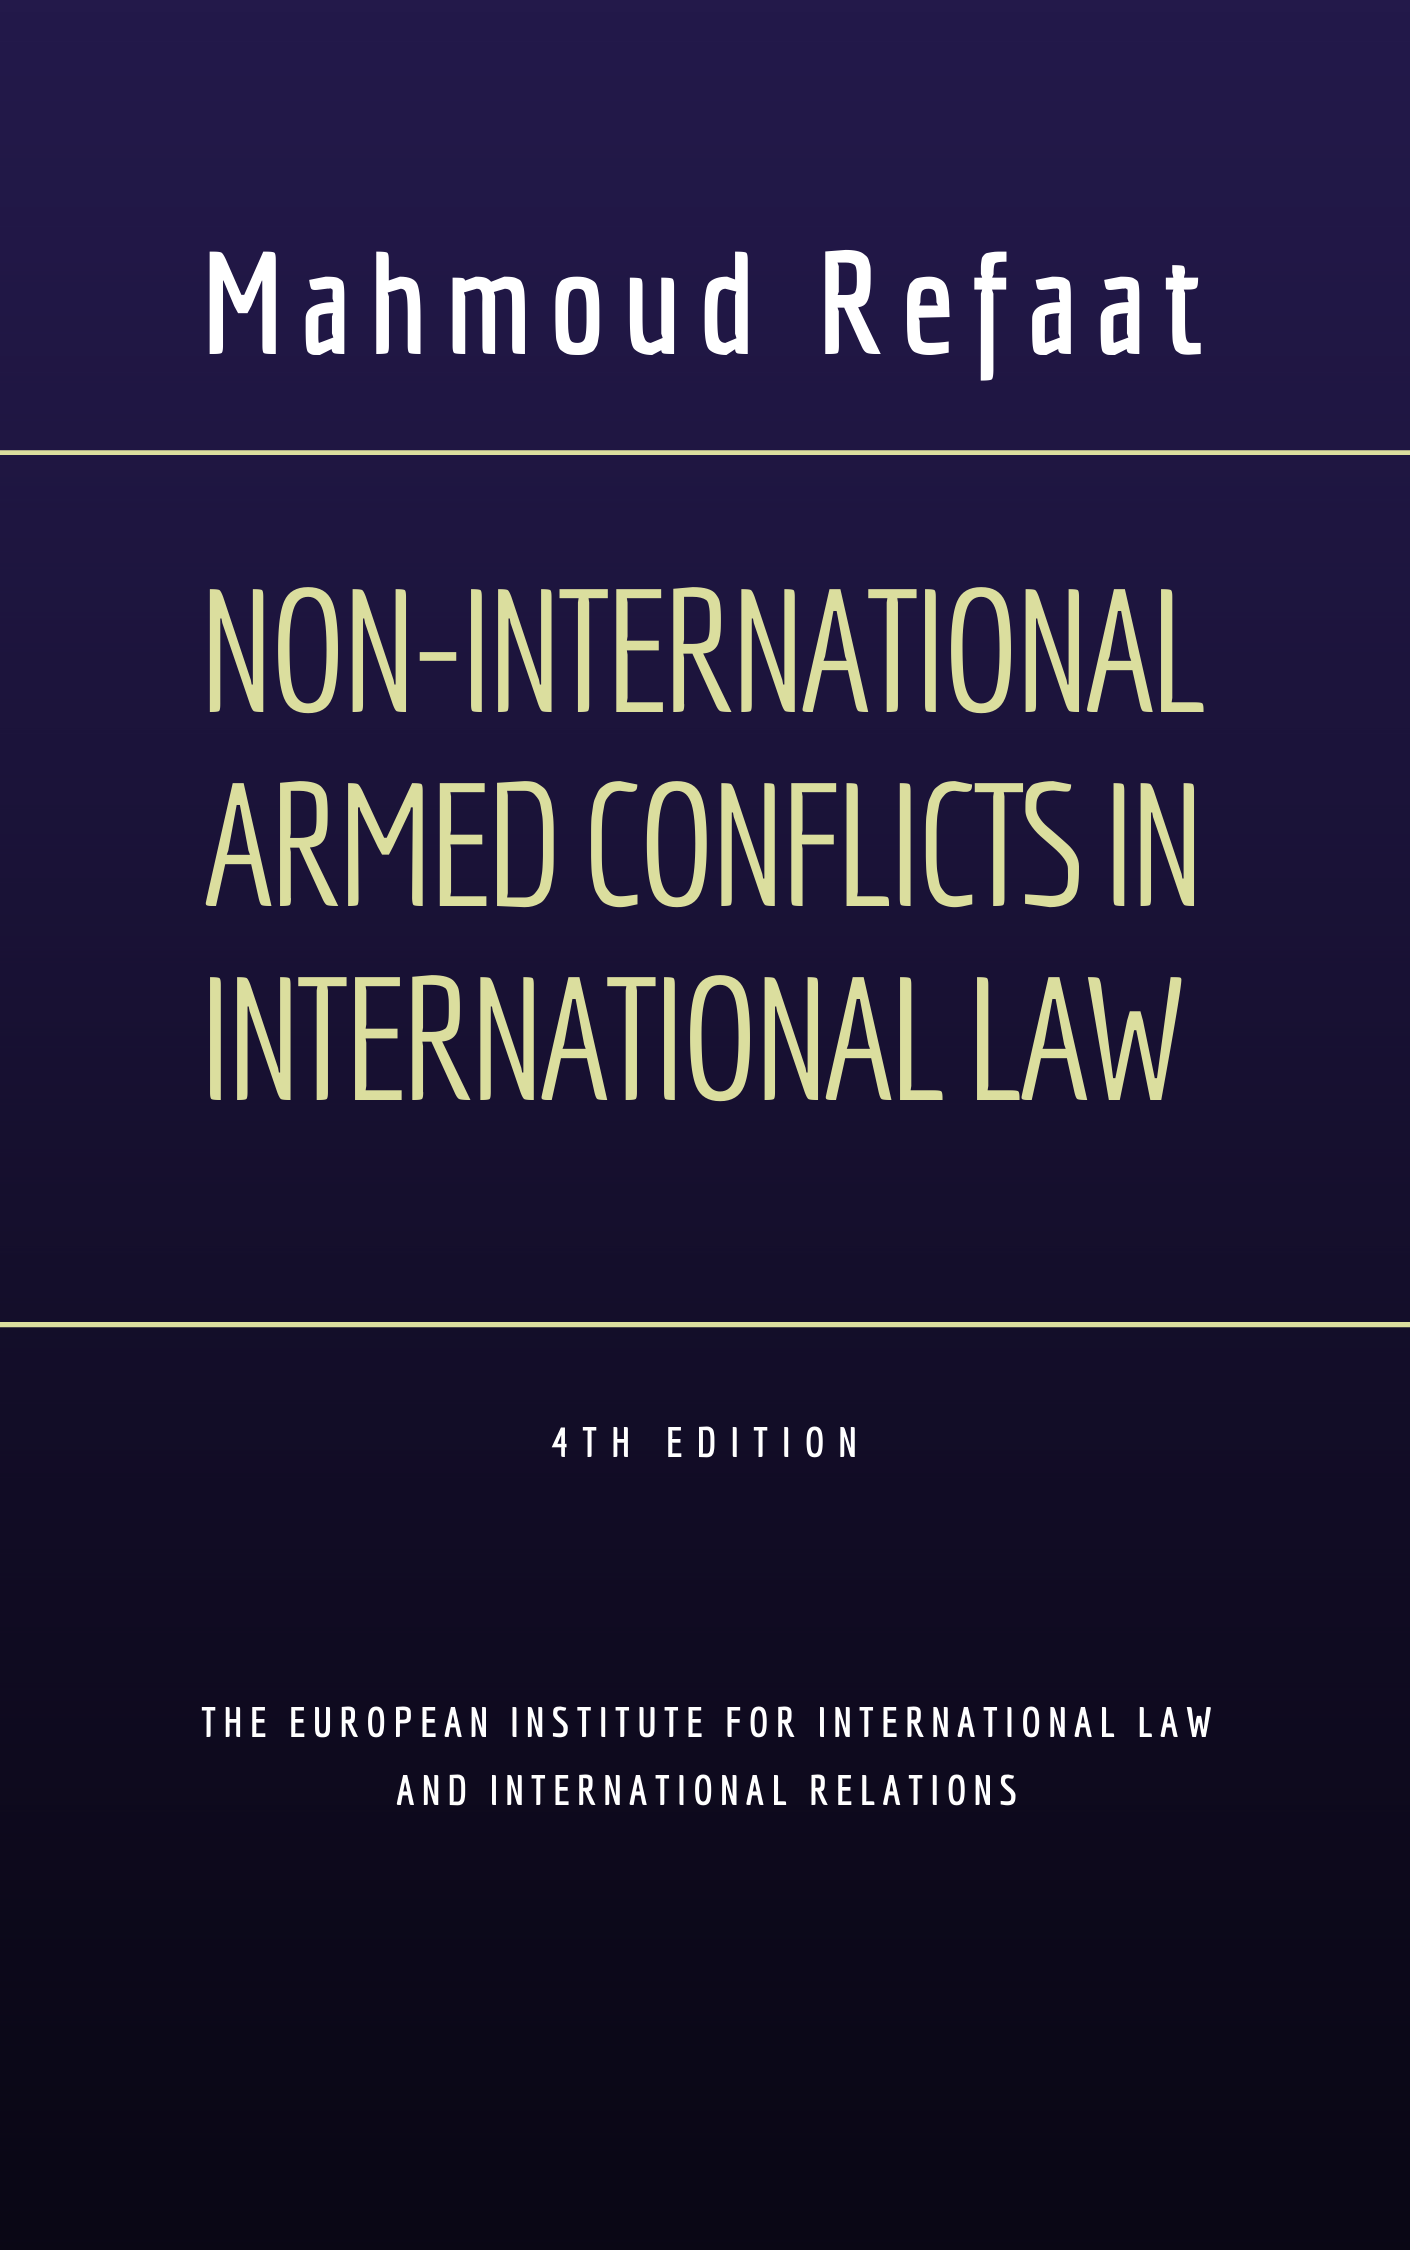 definition of a non-international armed conflict